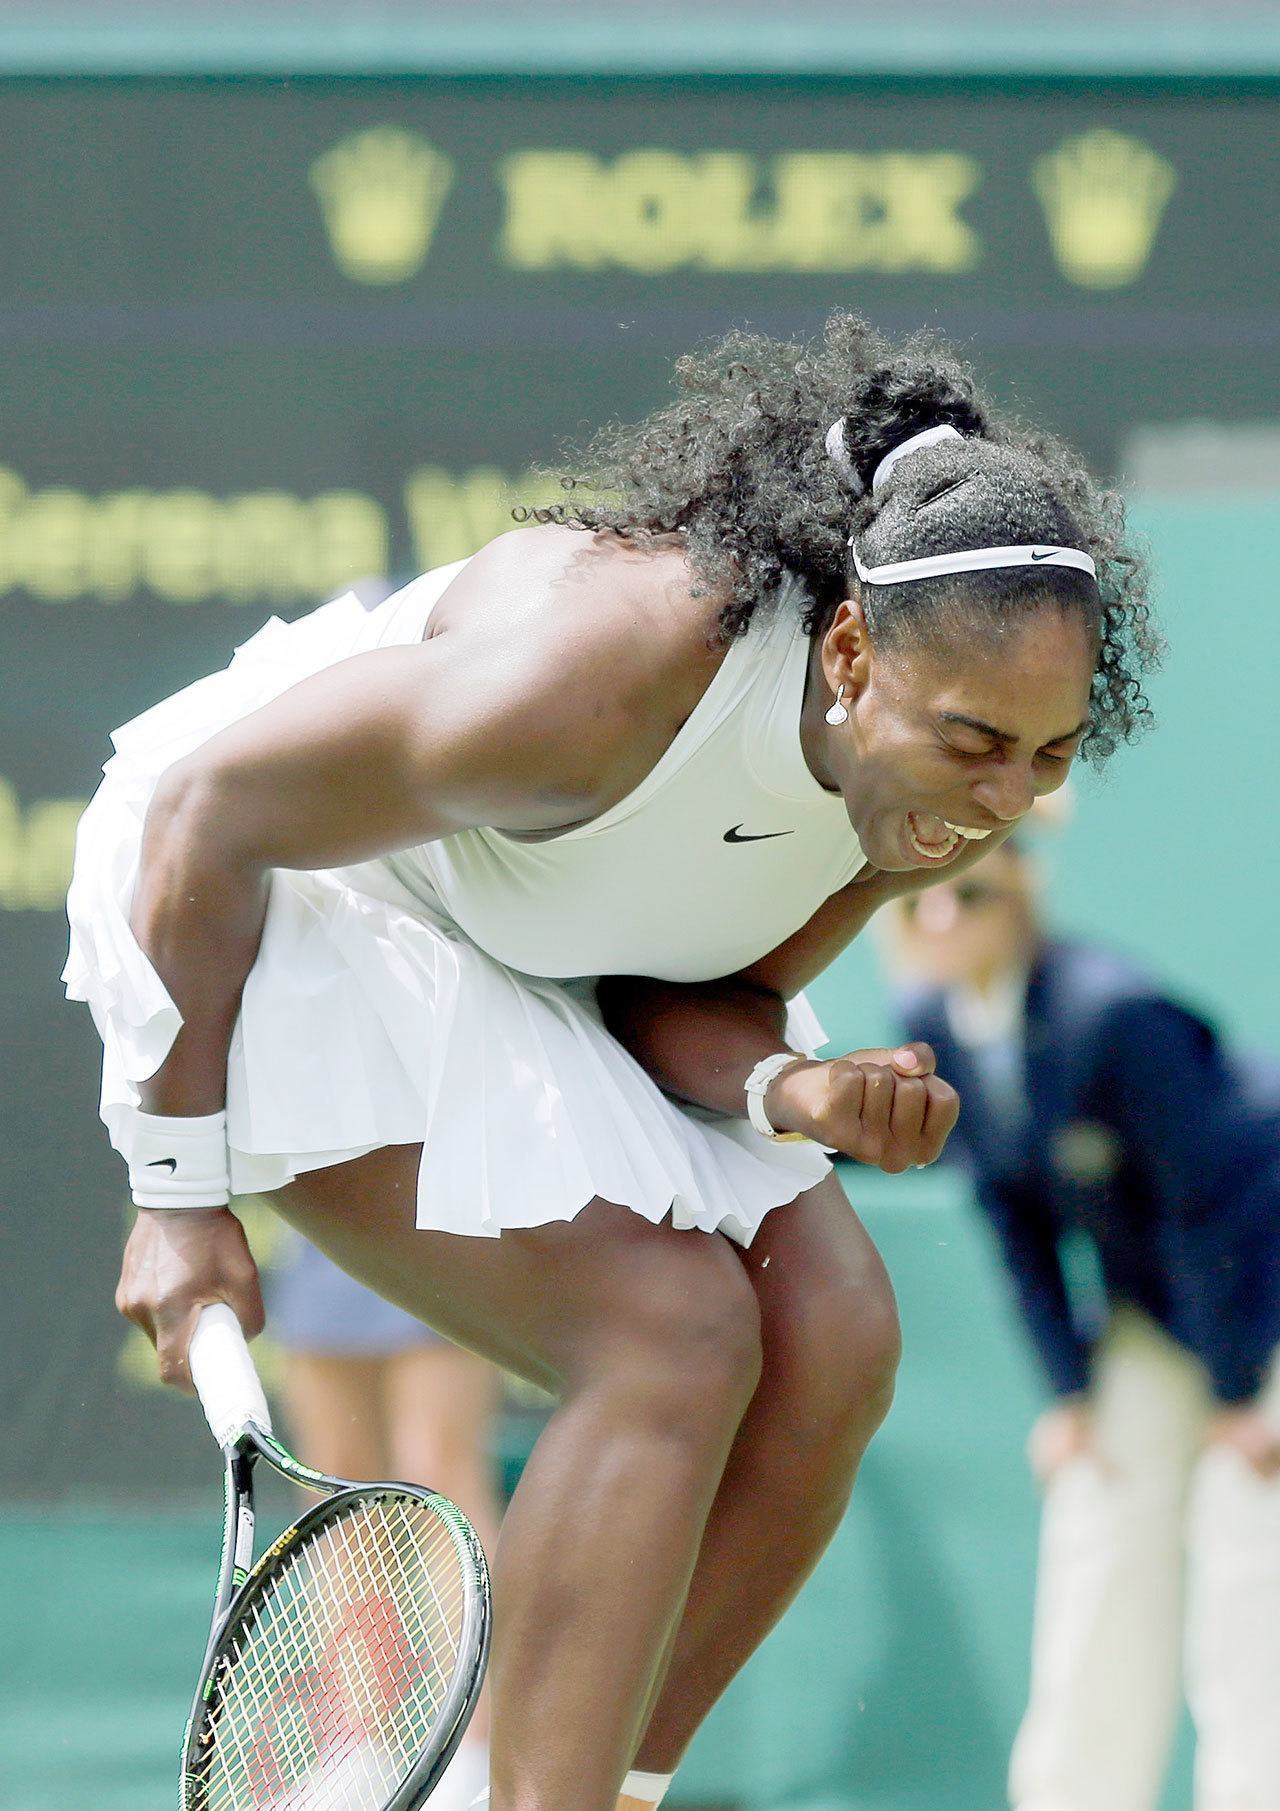 Serena Williams of the U.S celebrates a point against Amara Safikovic of Switzerland during their women’s singles match on day two of the Wimbledon Tennis Championships in London, Tuesday, June 28, 2016. (AP Photo/Ben Curtis)